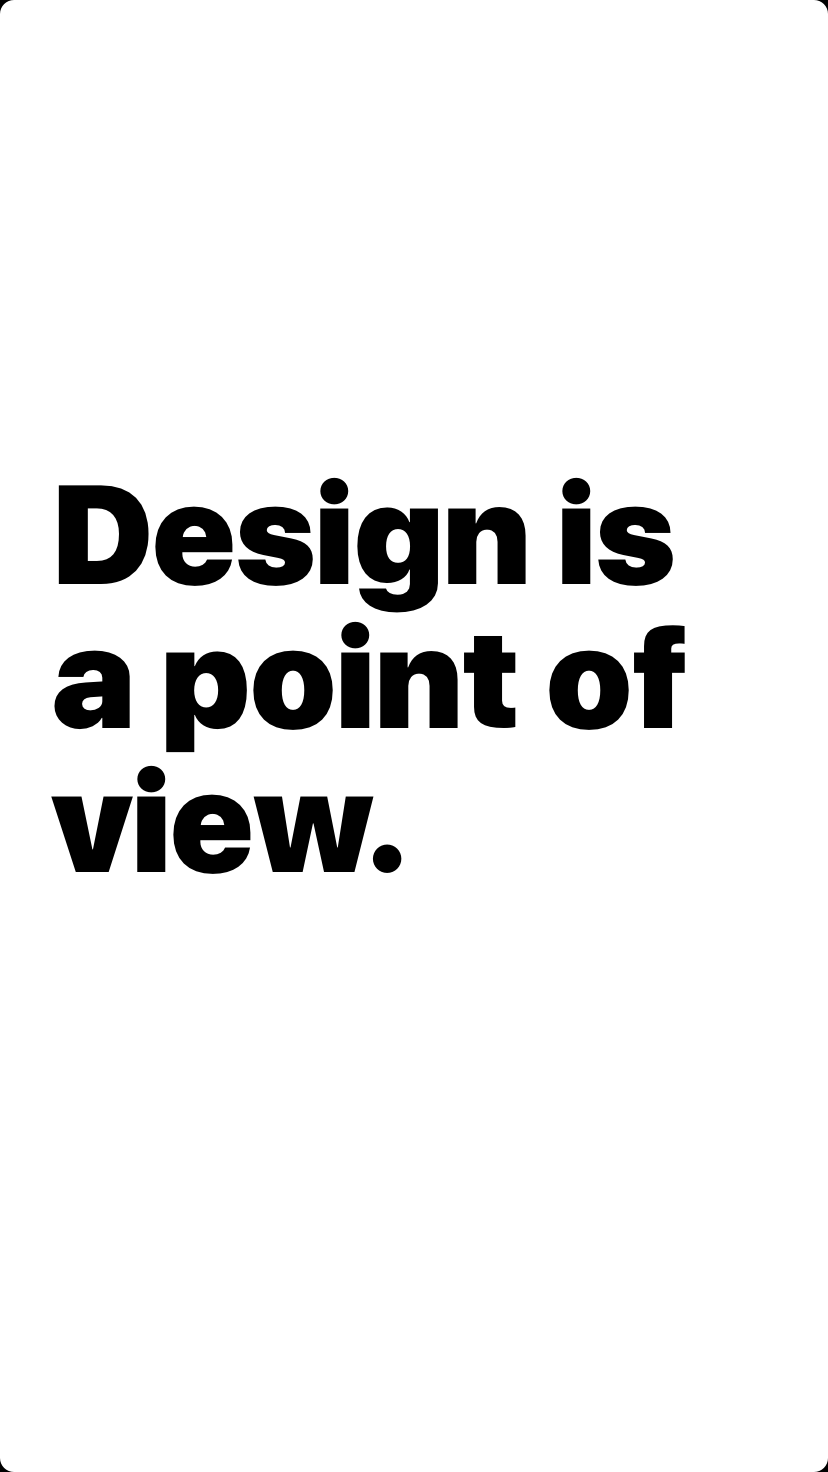 Design is a point of view.